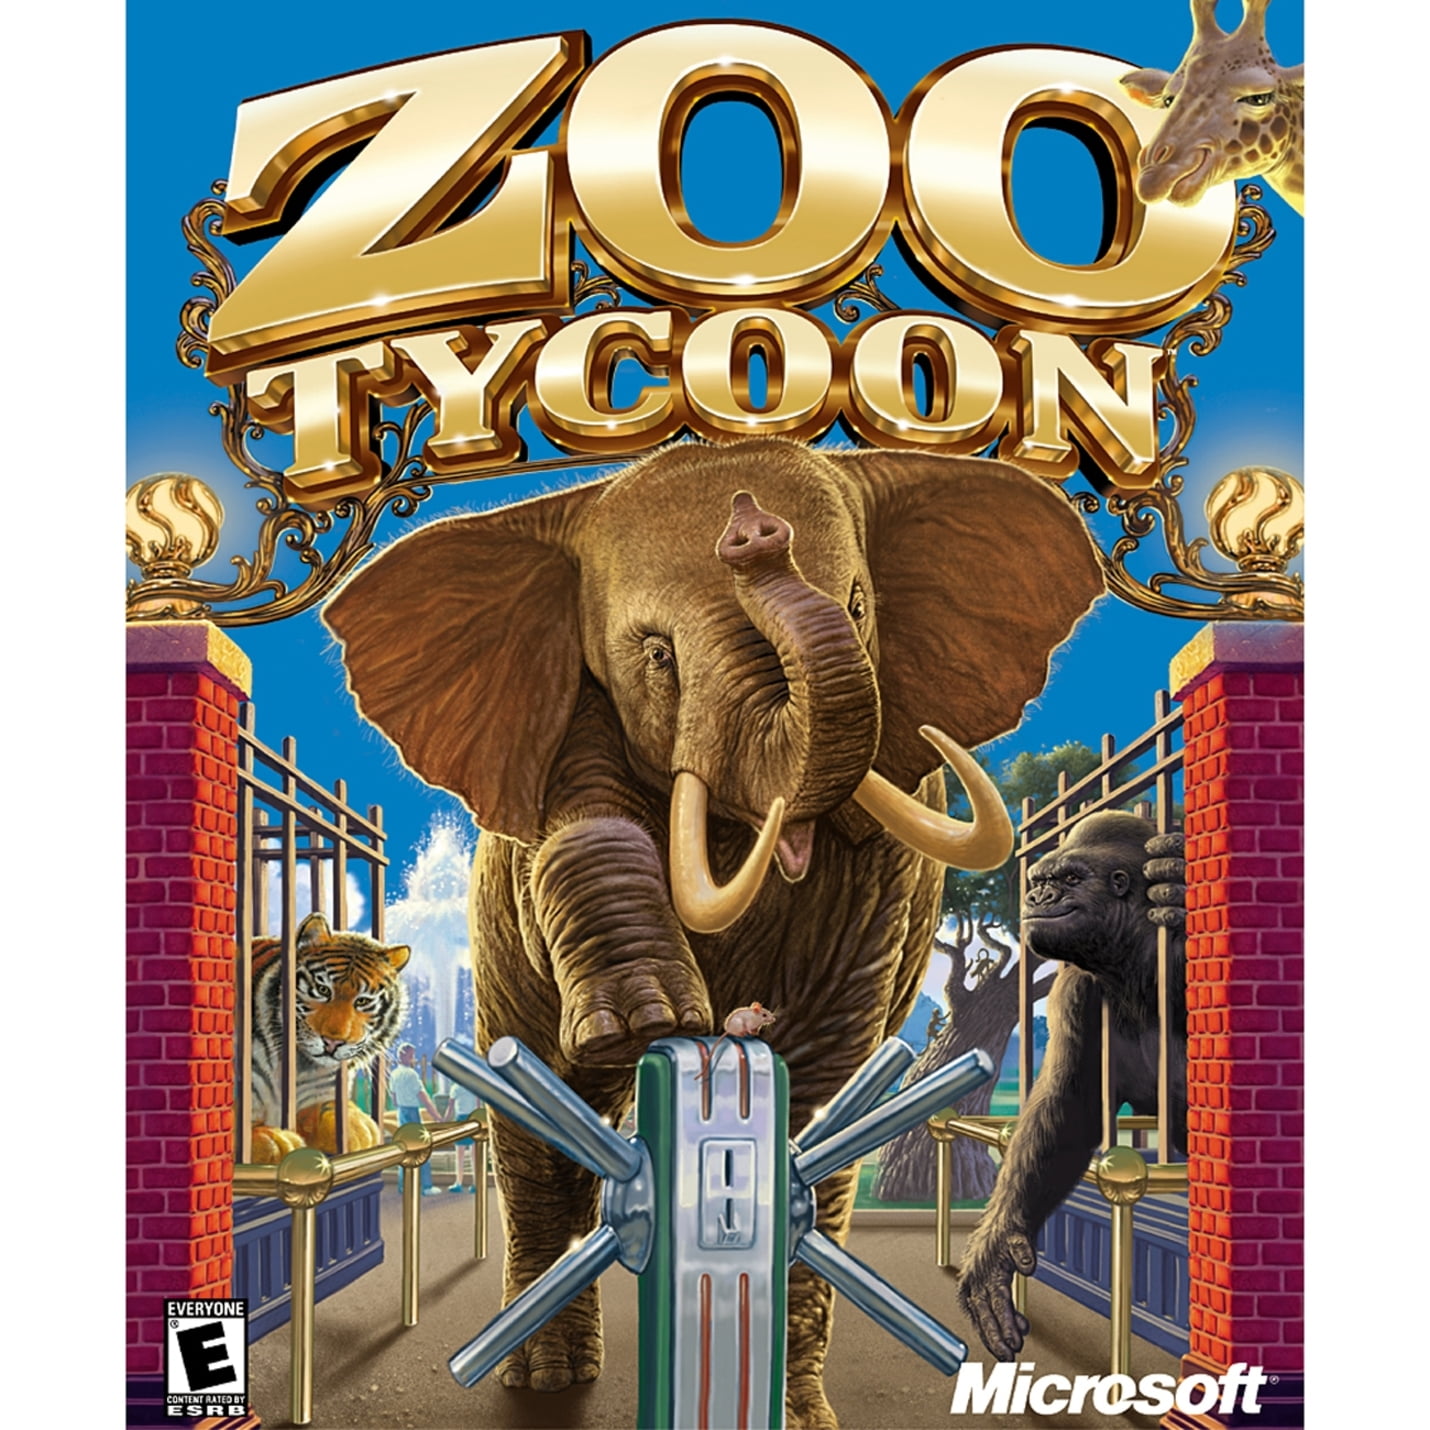 Microsoft Zoo was to take Zoo Tycoon in new direction - Report - GameSpot